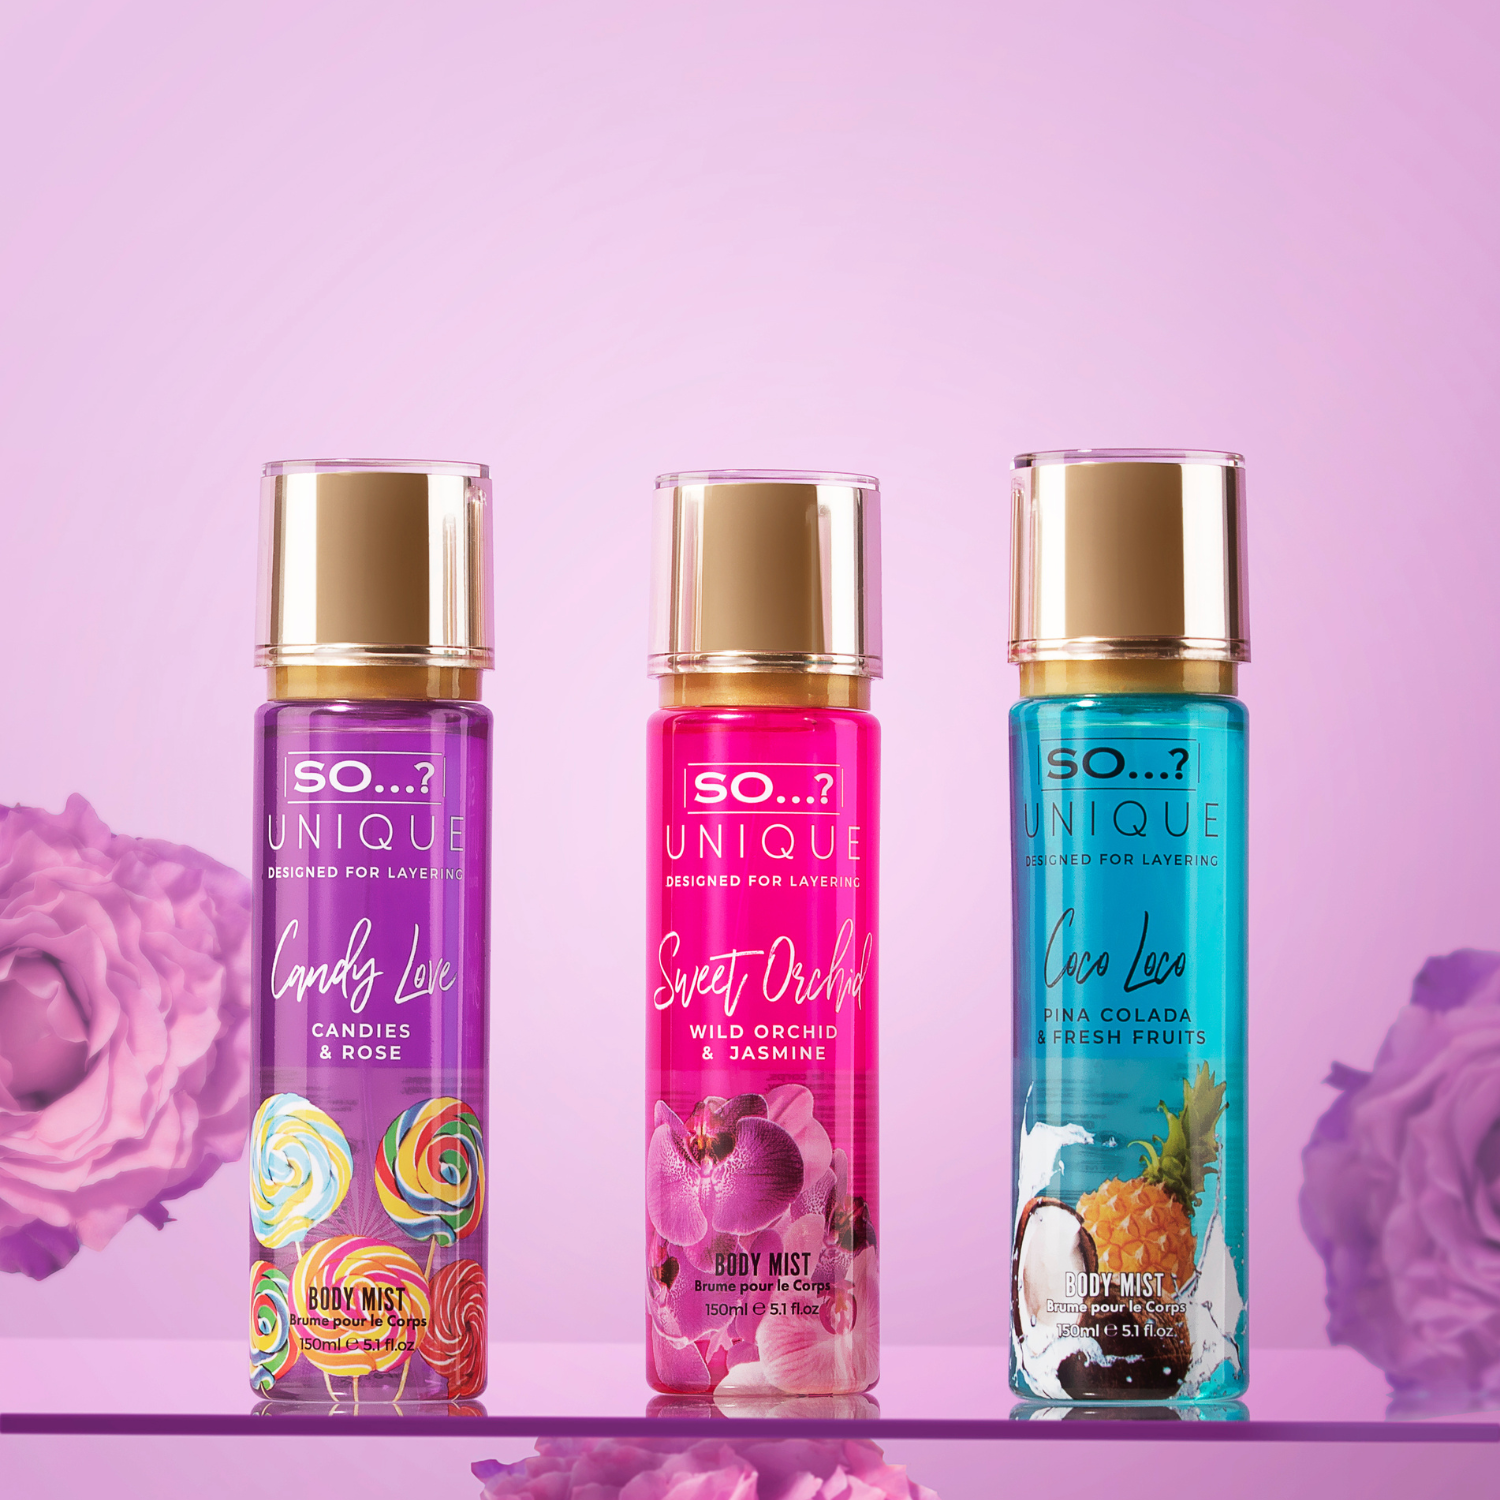 SO...? Unique Sweet Orchid Body Mist